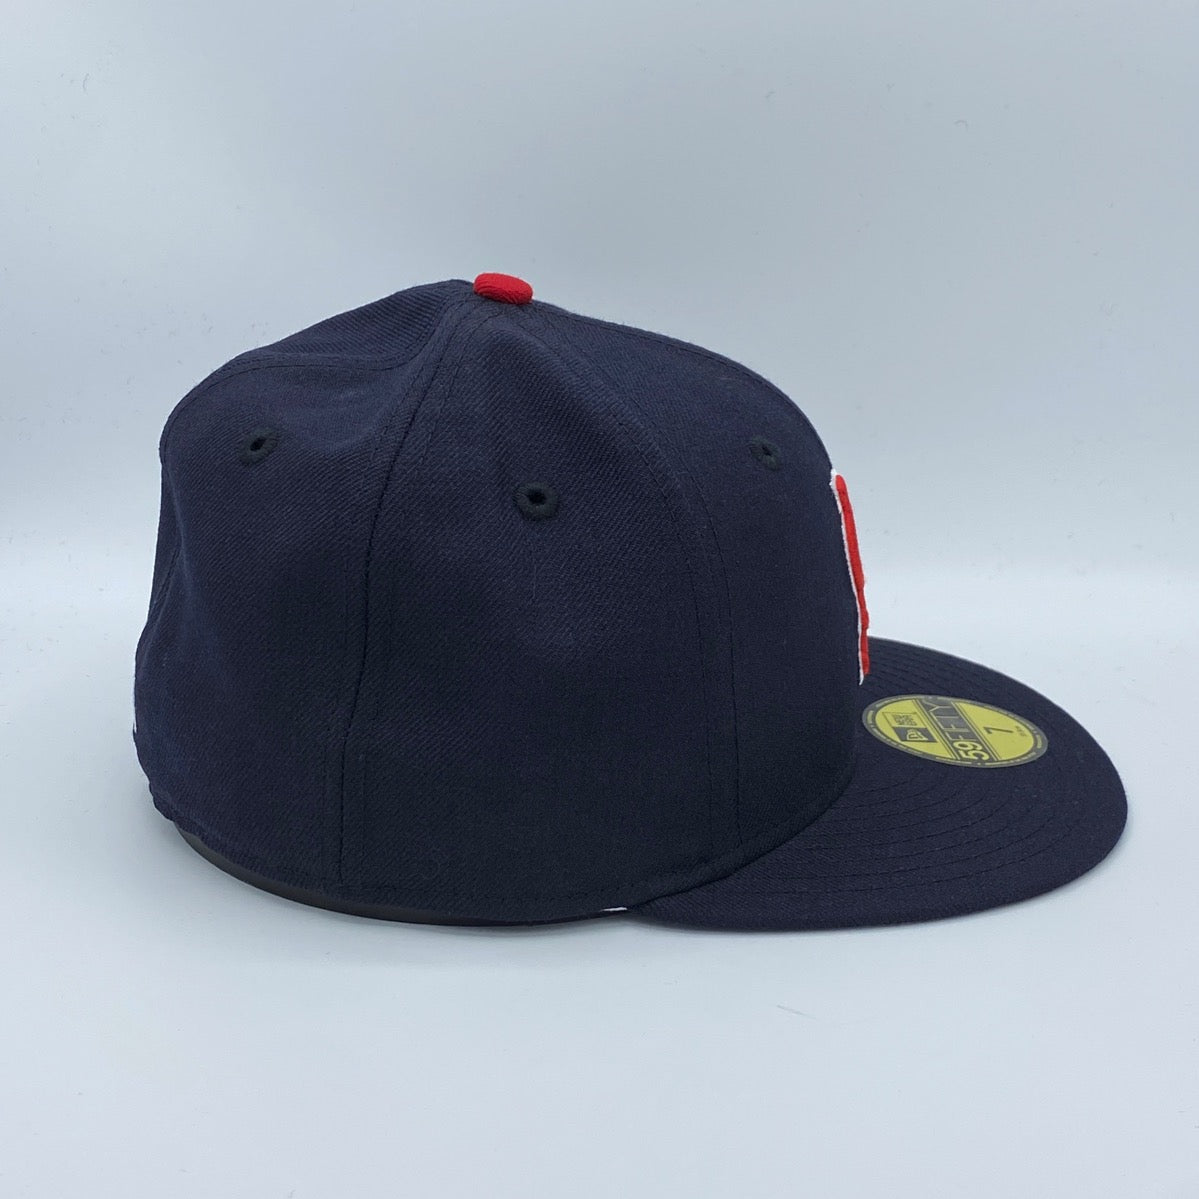 Cardinals COOPERSTOWN SKYLINE Navy Fitted Hat by American Needle